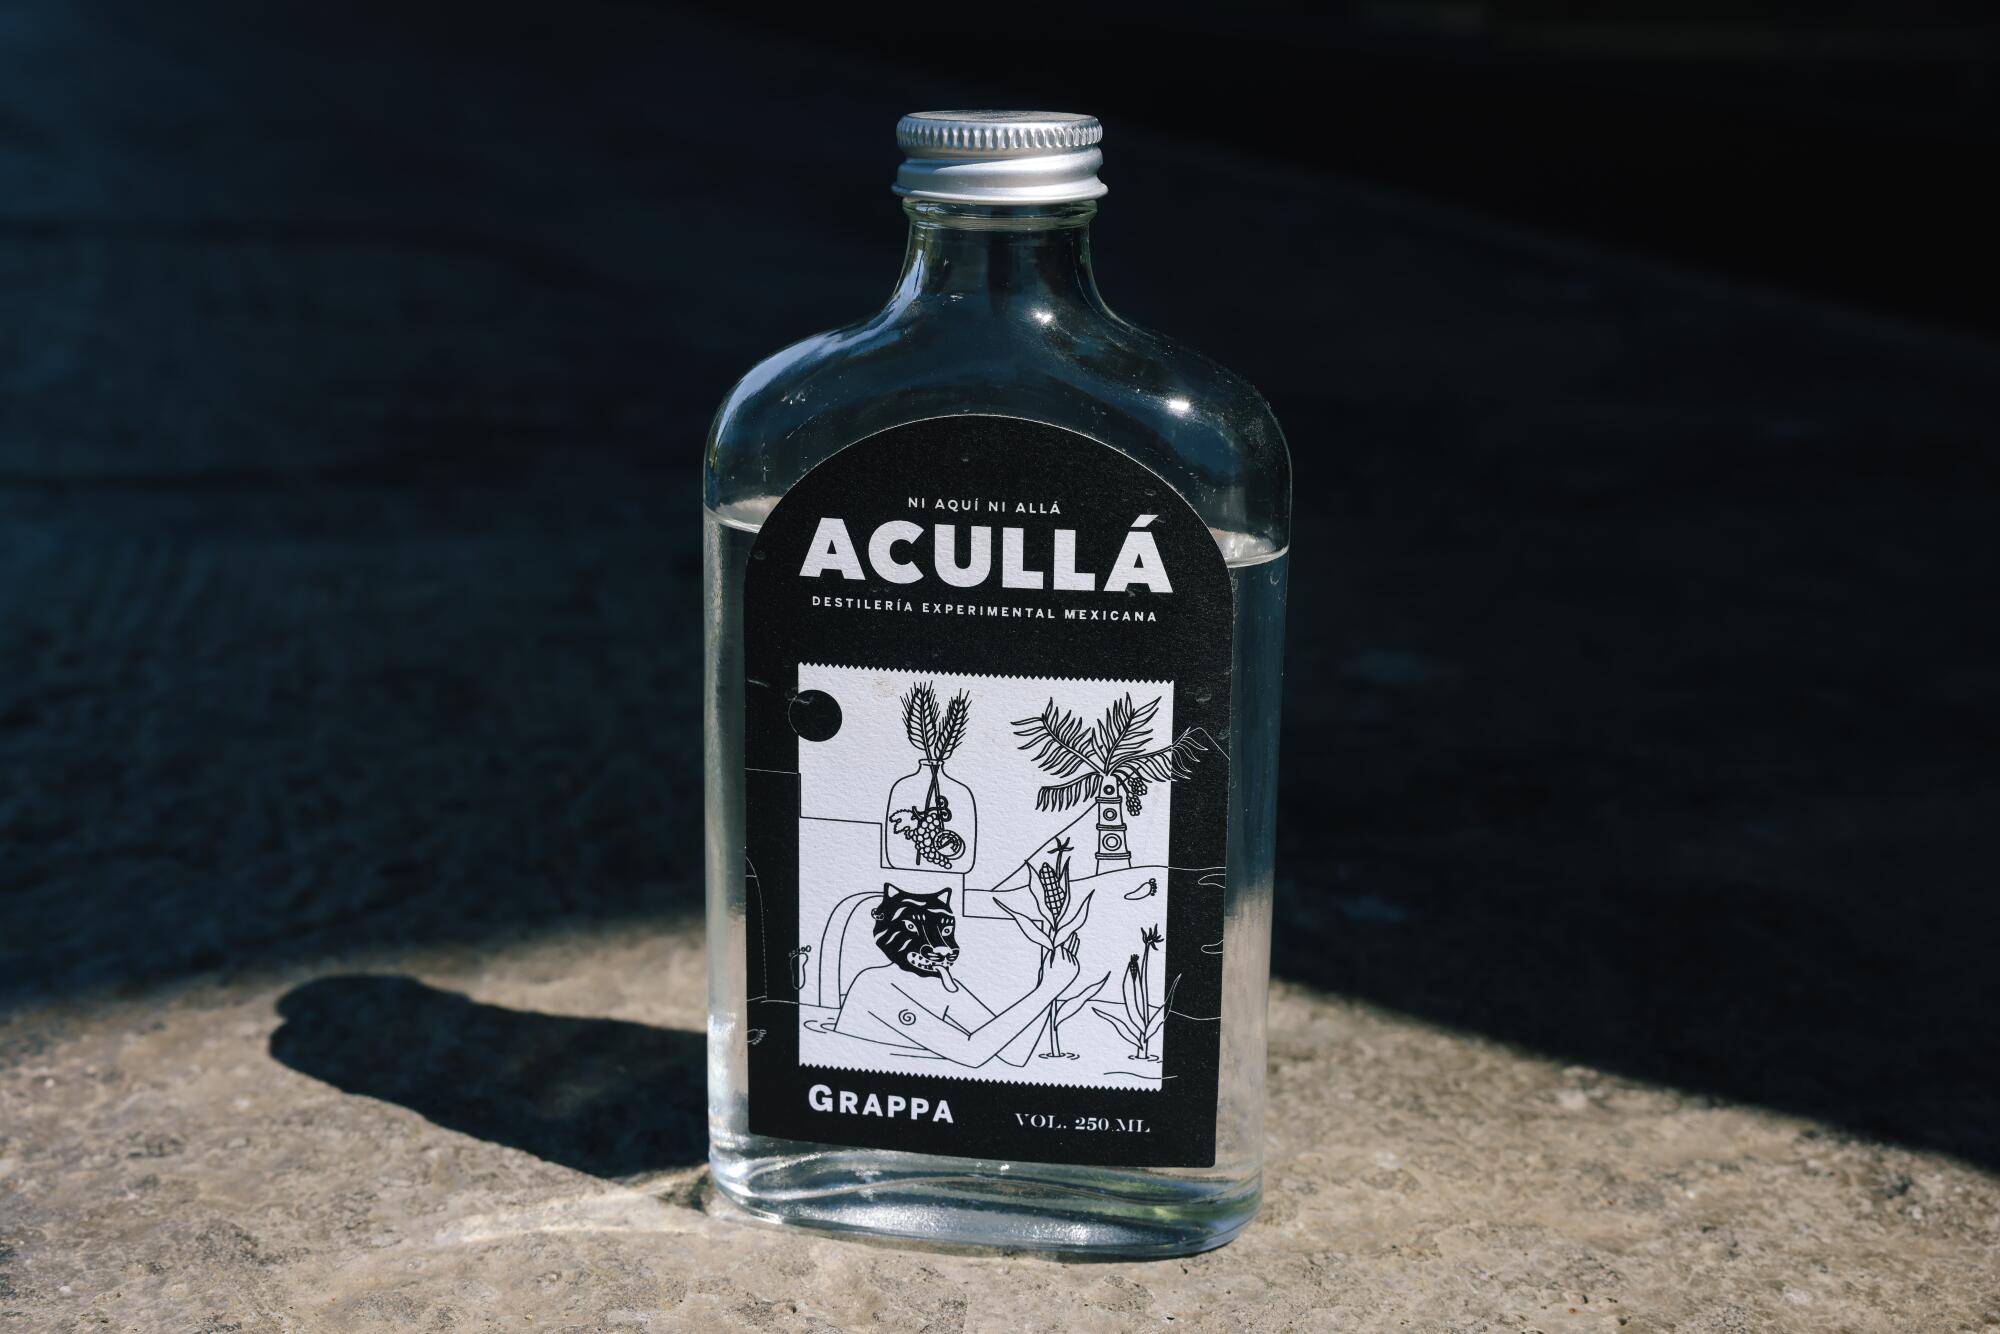 A bottle of Aculla Grappa.